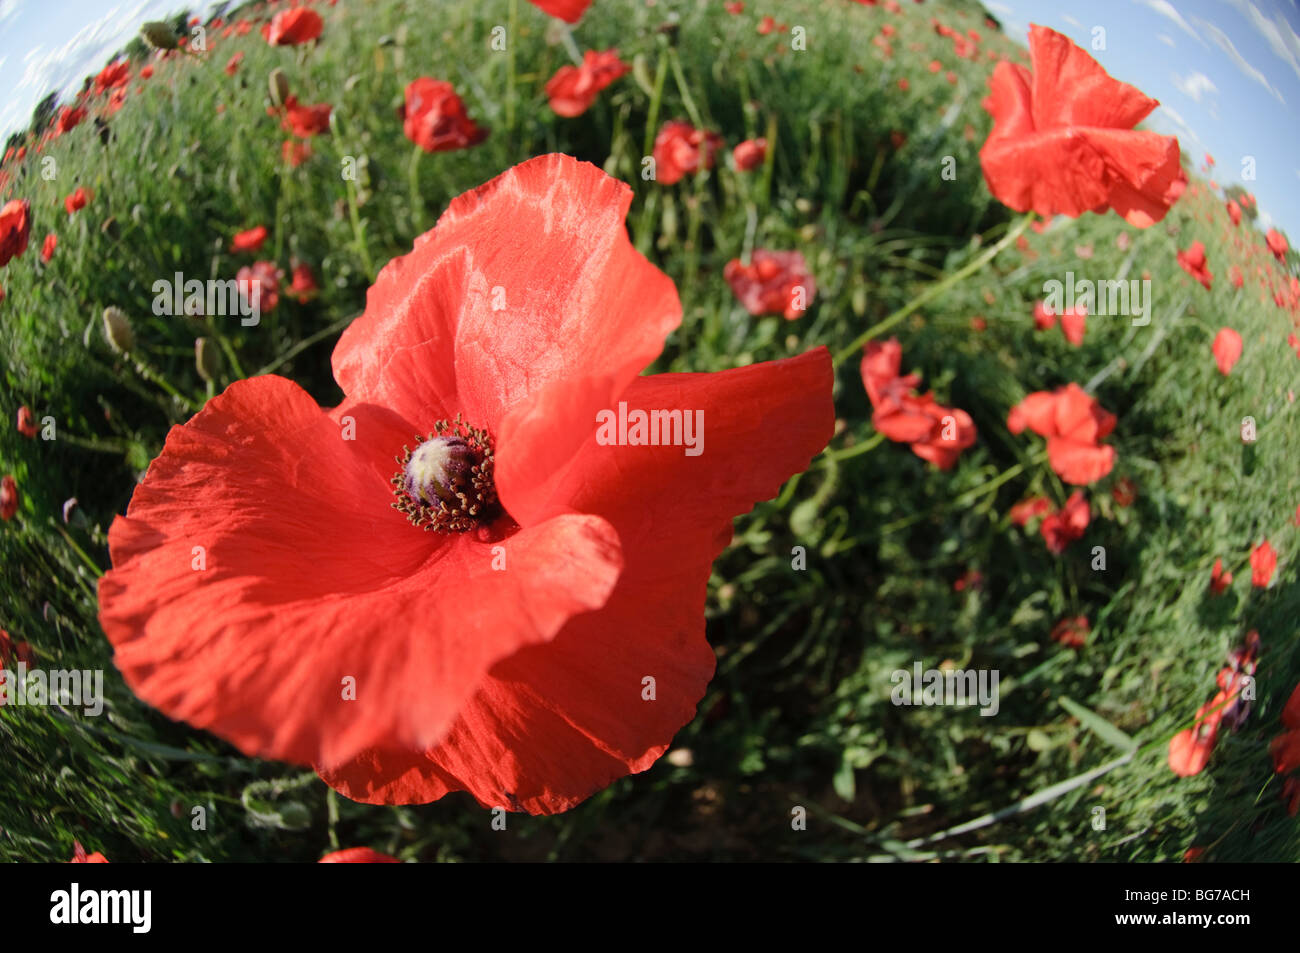 Distorted wide view of Red Poppy flowers in a field in June, Spain Stock Photo